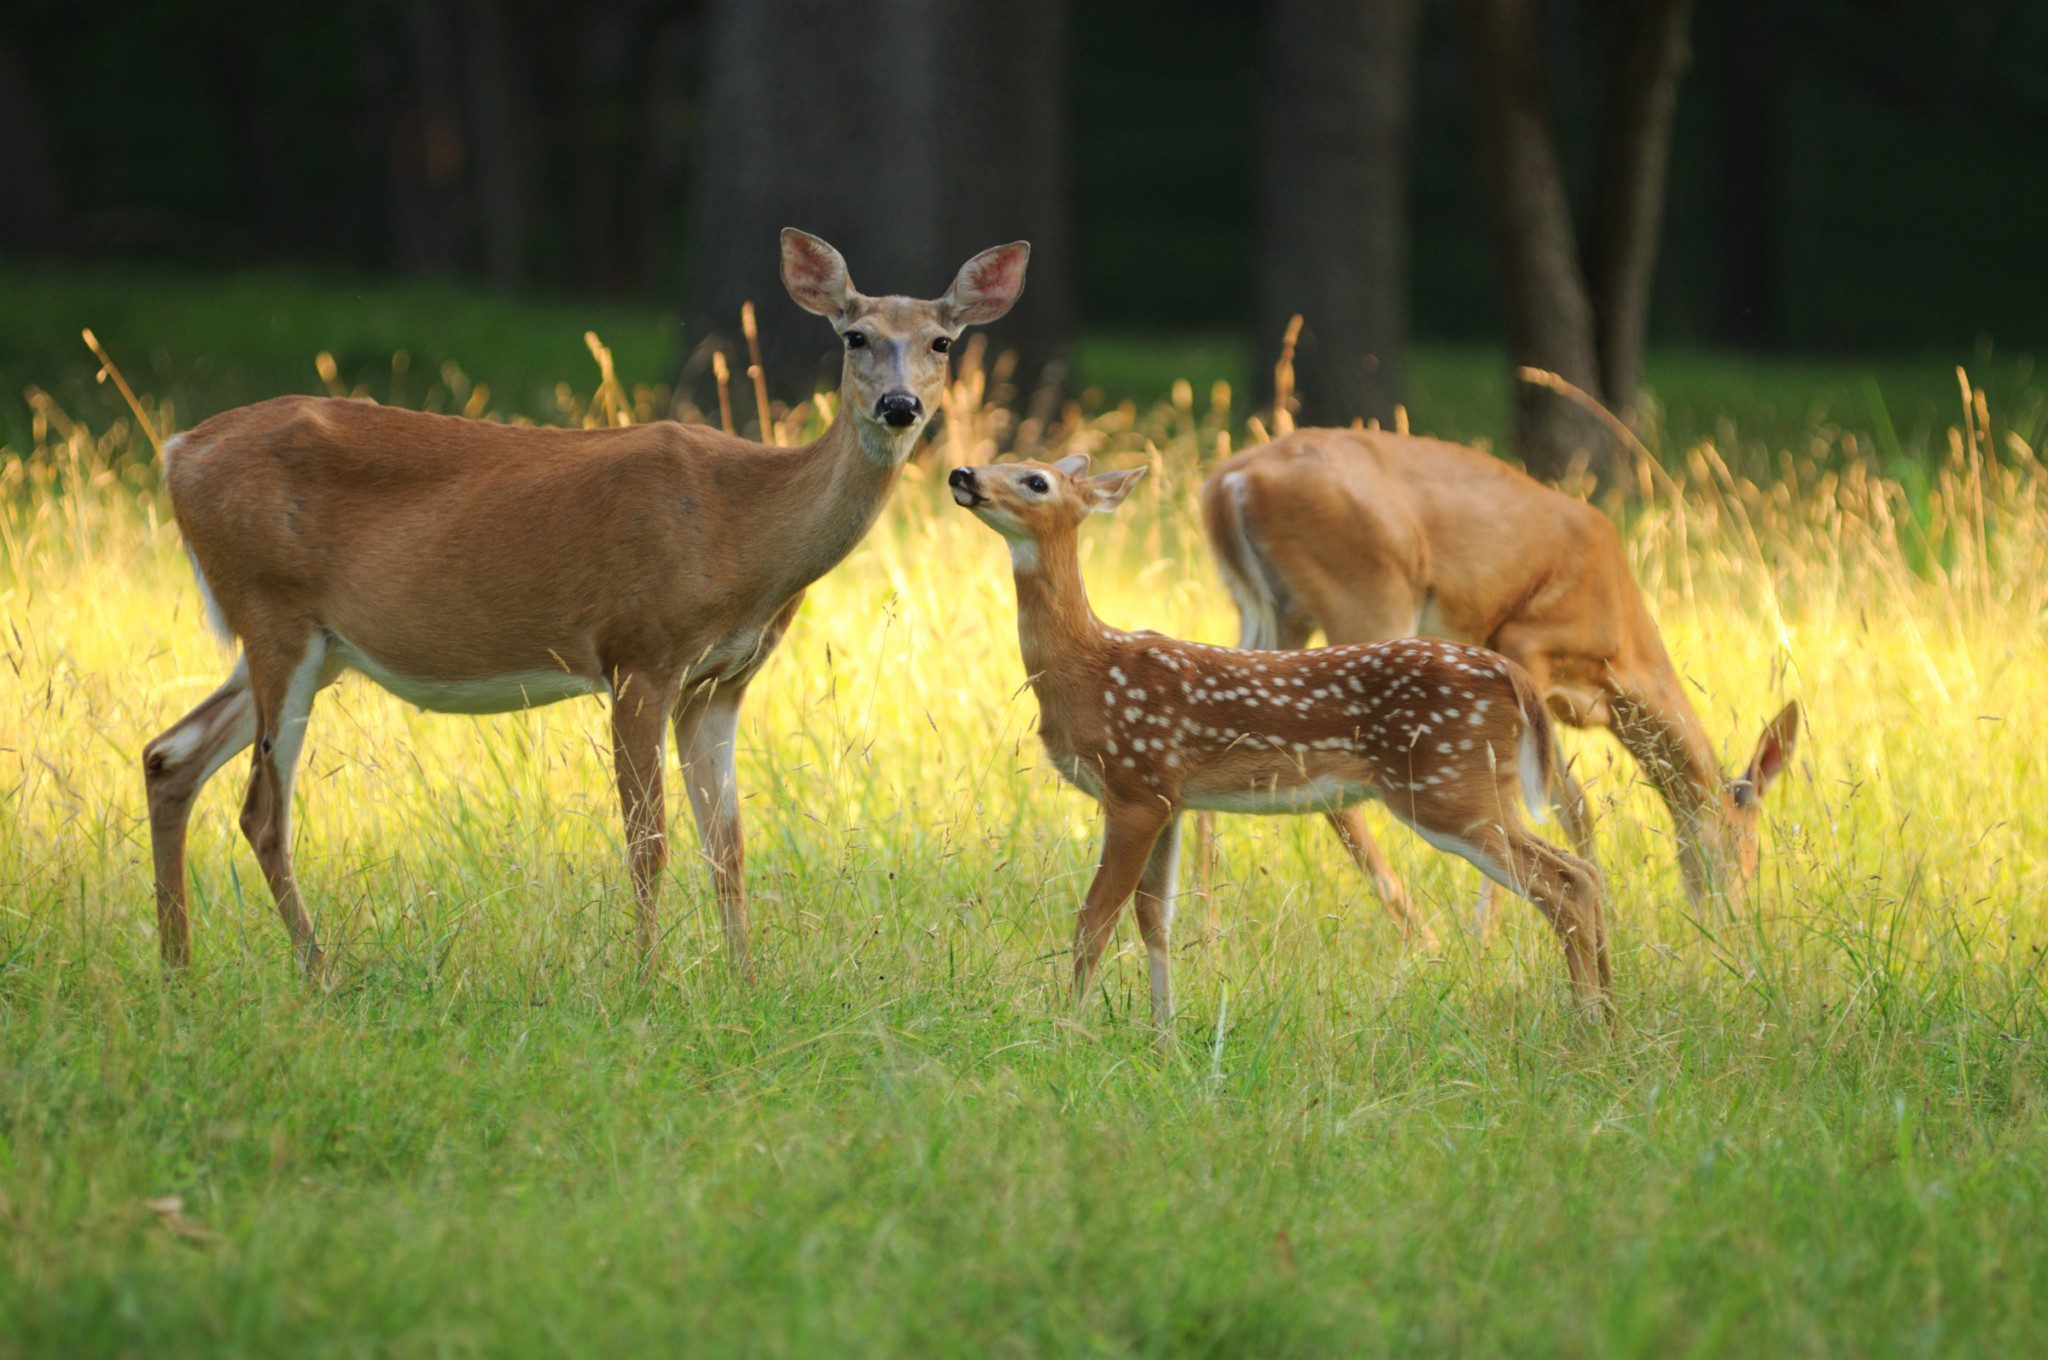 Fawn and baby deer.